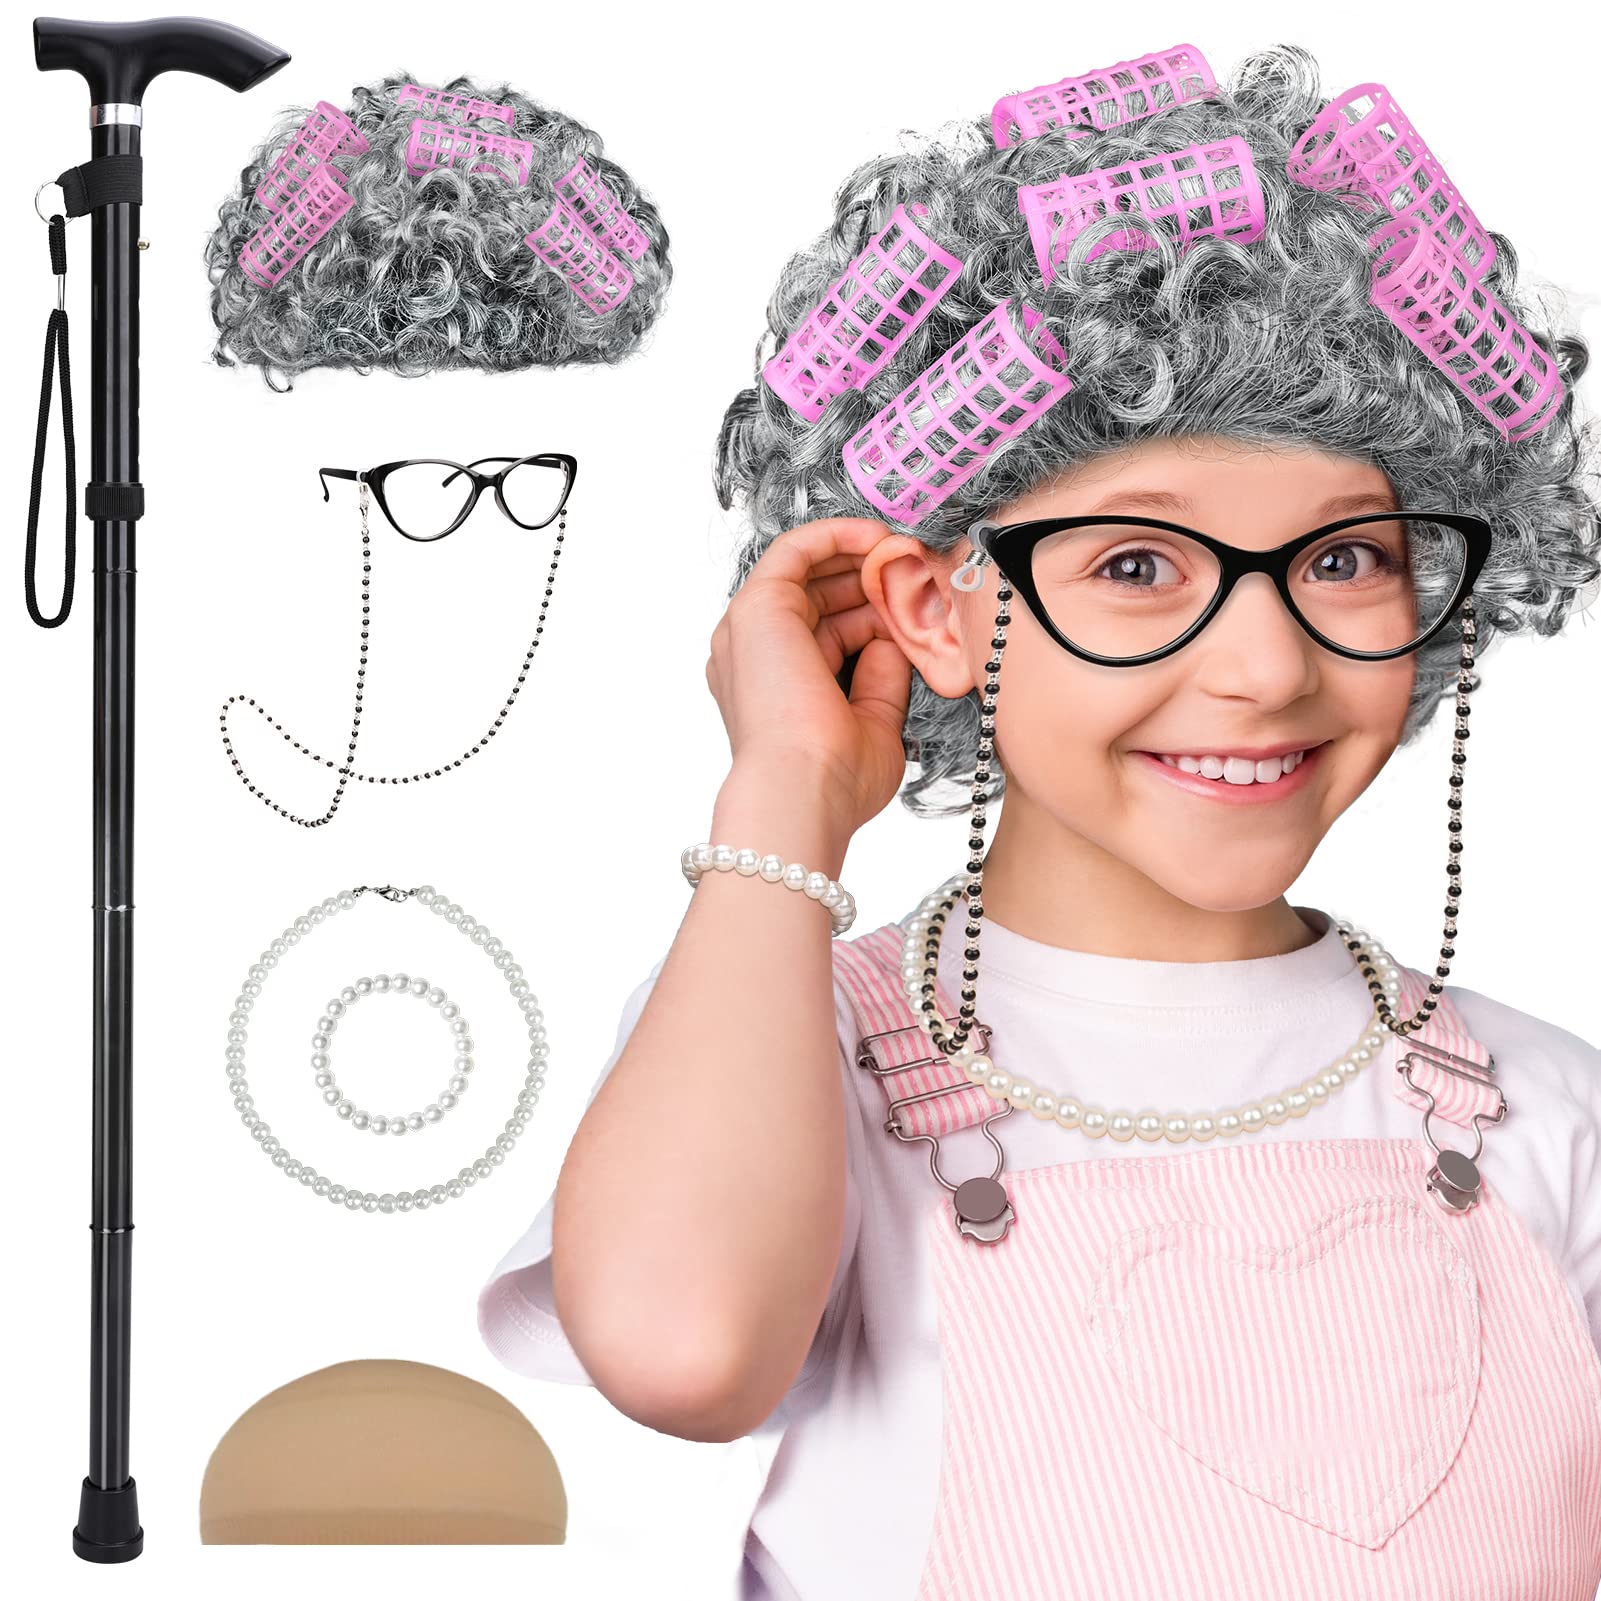 ZITURI Old Lady Costume for Kids - 100th Day of School Costume for Girls - Kids Old Lady Costume Set for Halloween Cosplay